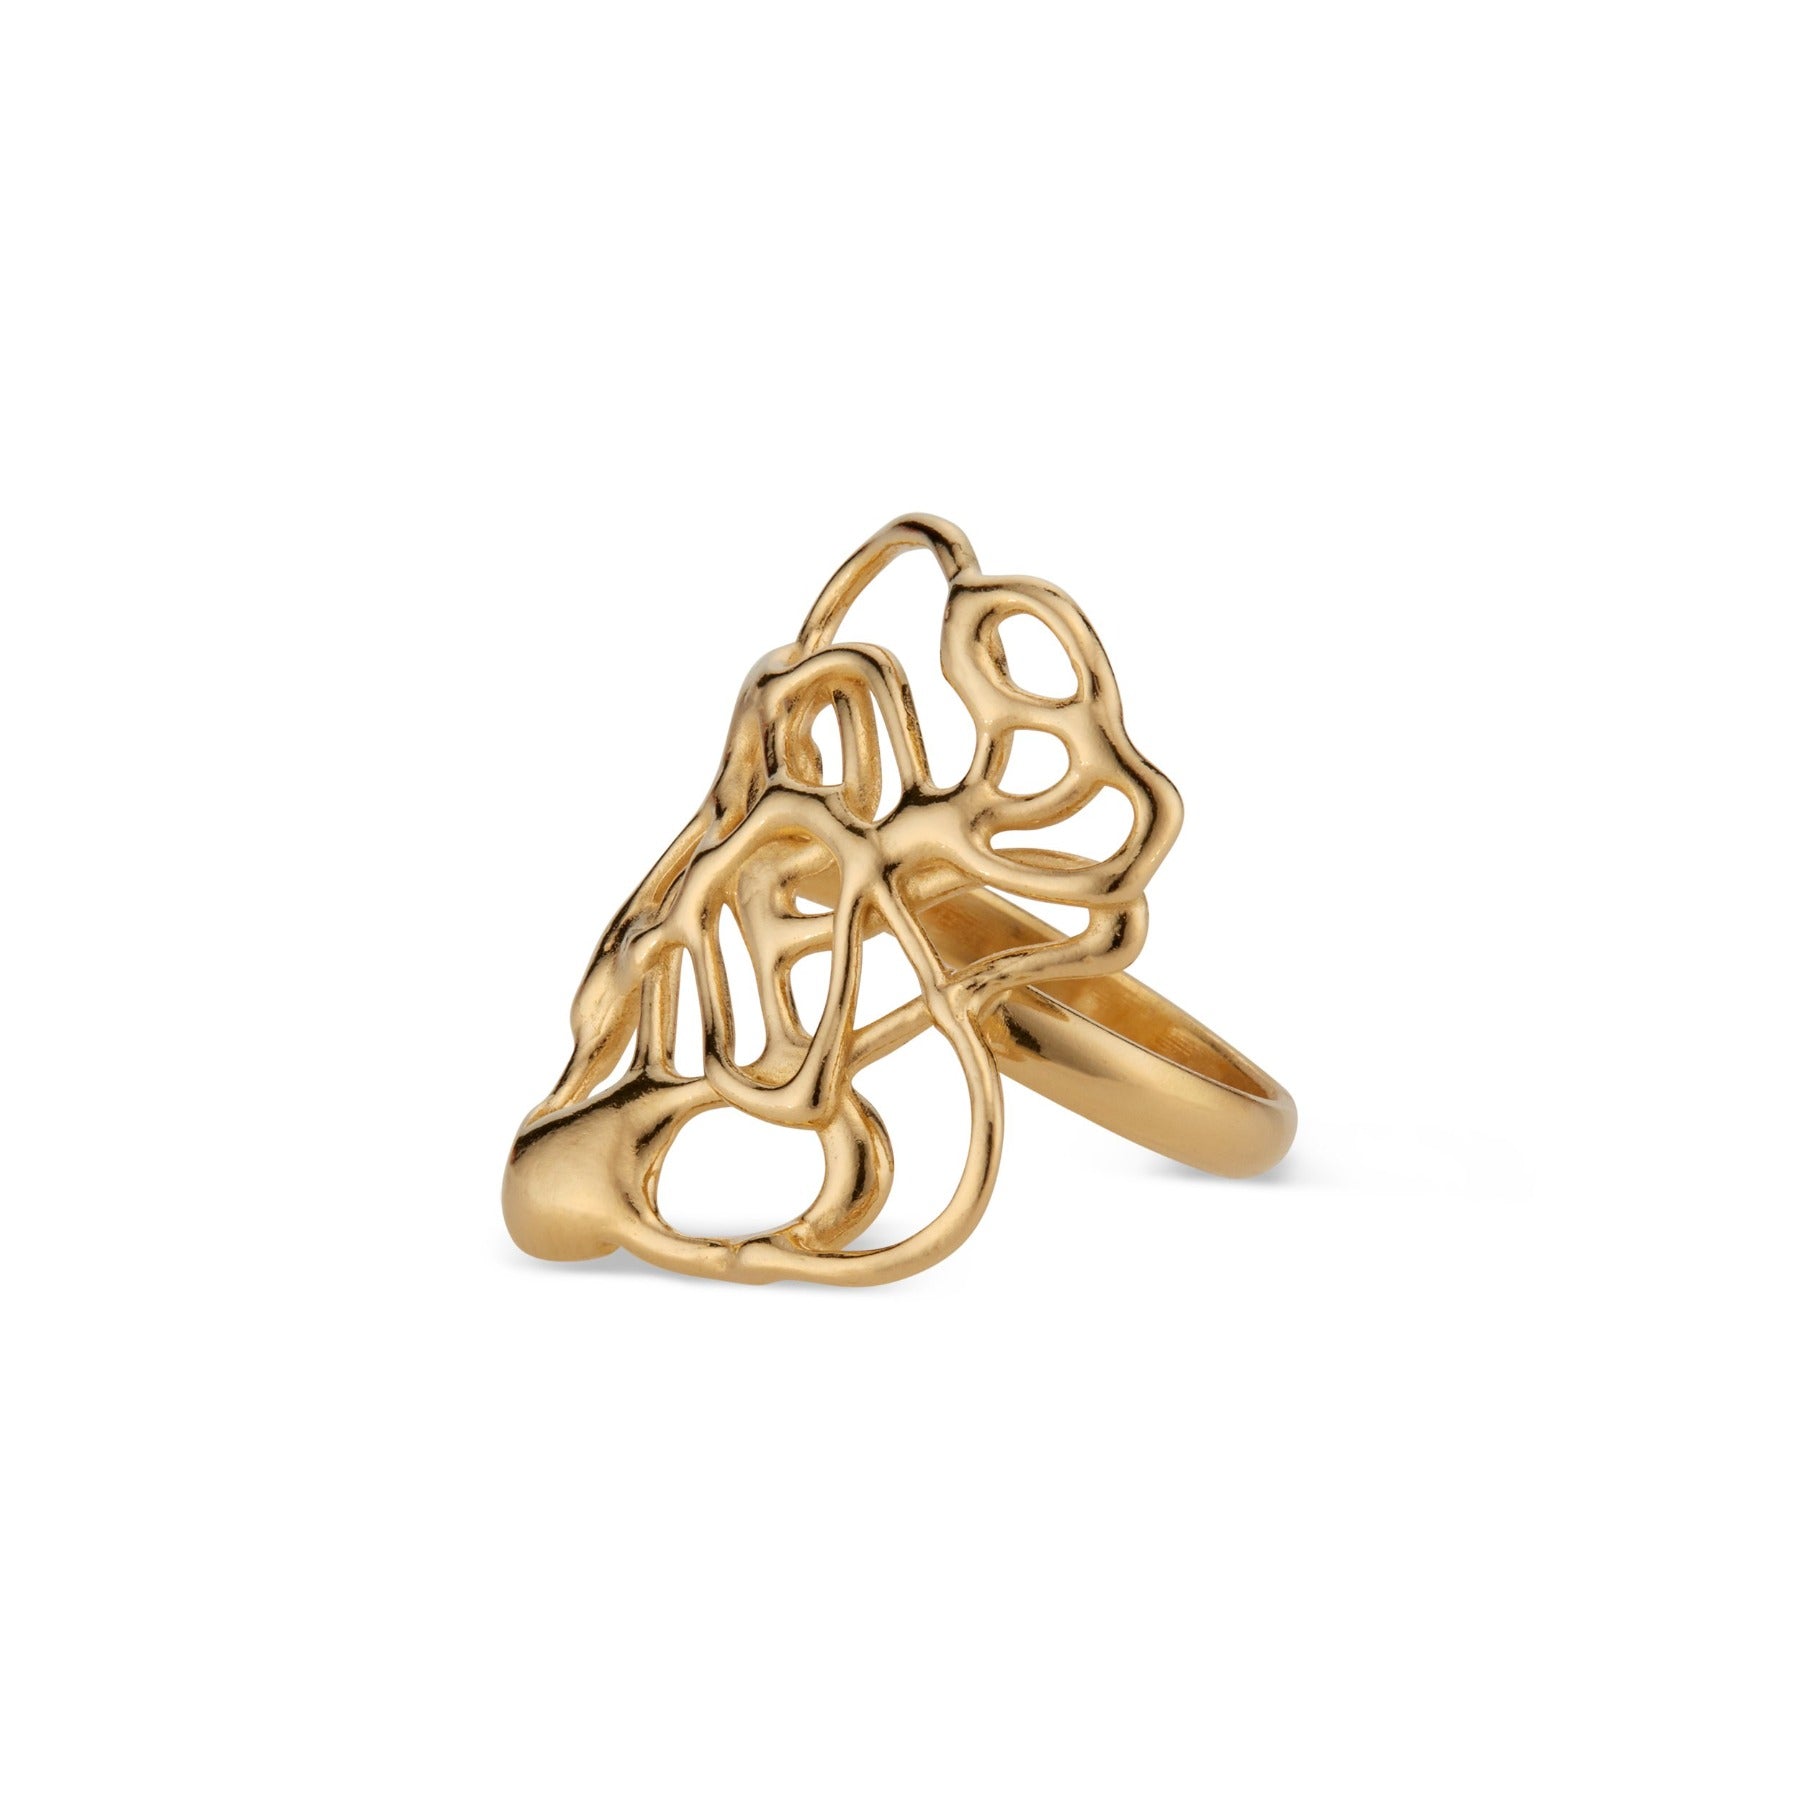 Side view of abstract, squiggle statement cocktail ring in 18k gold vermeil.